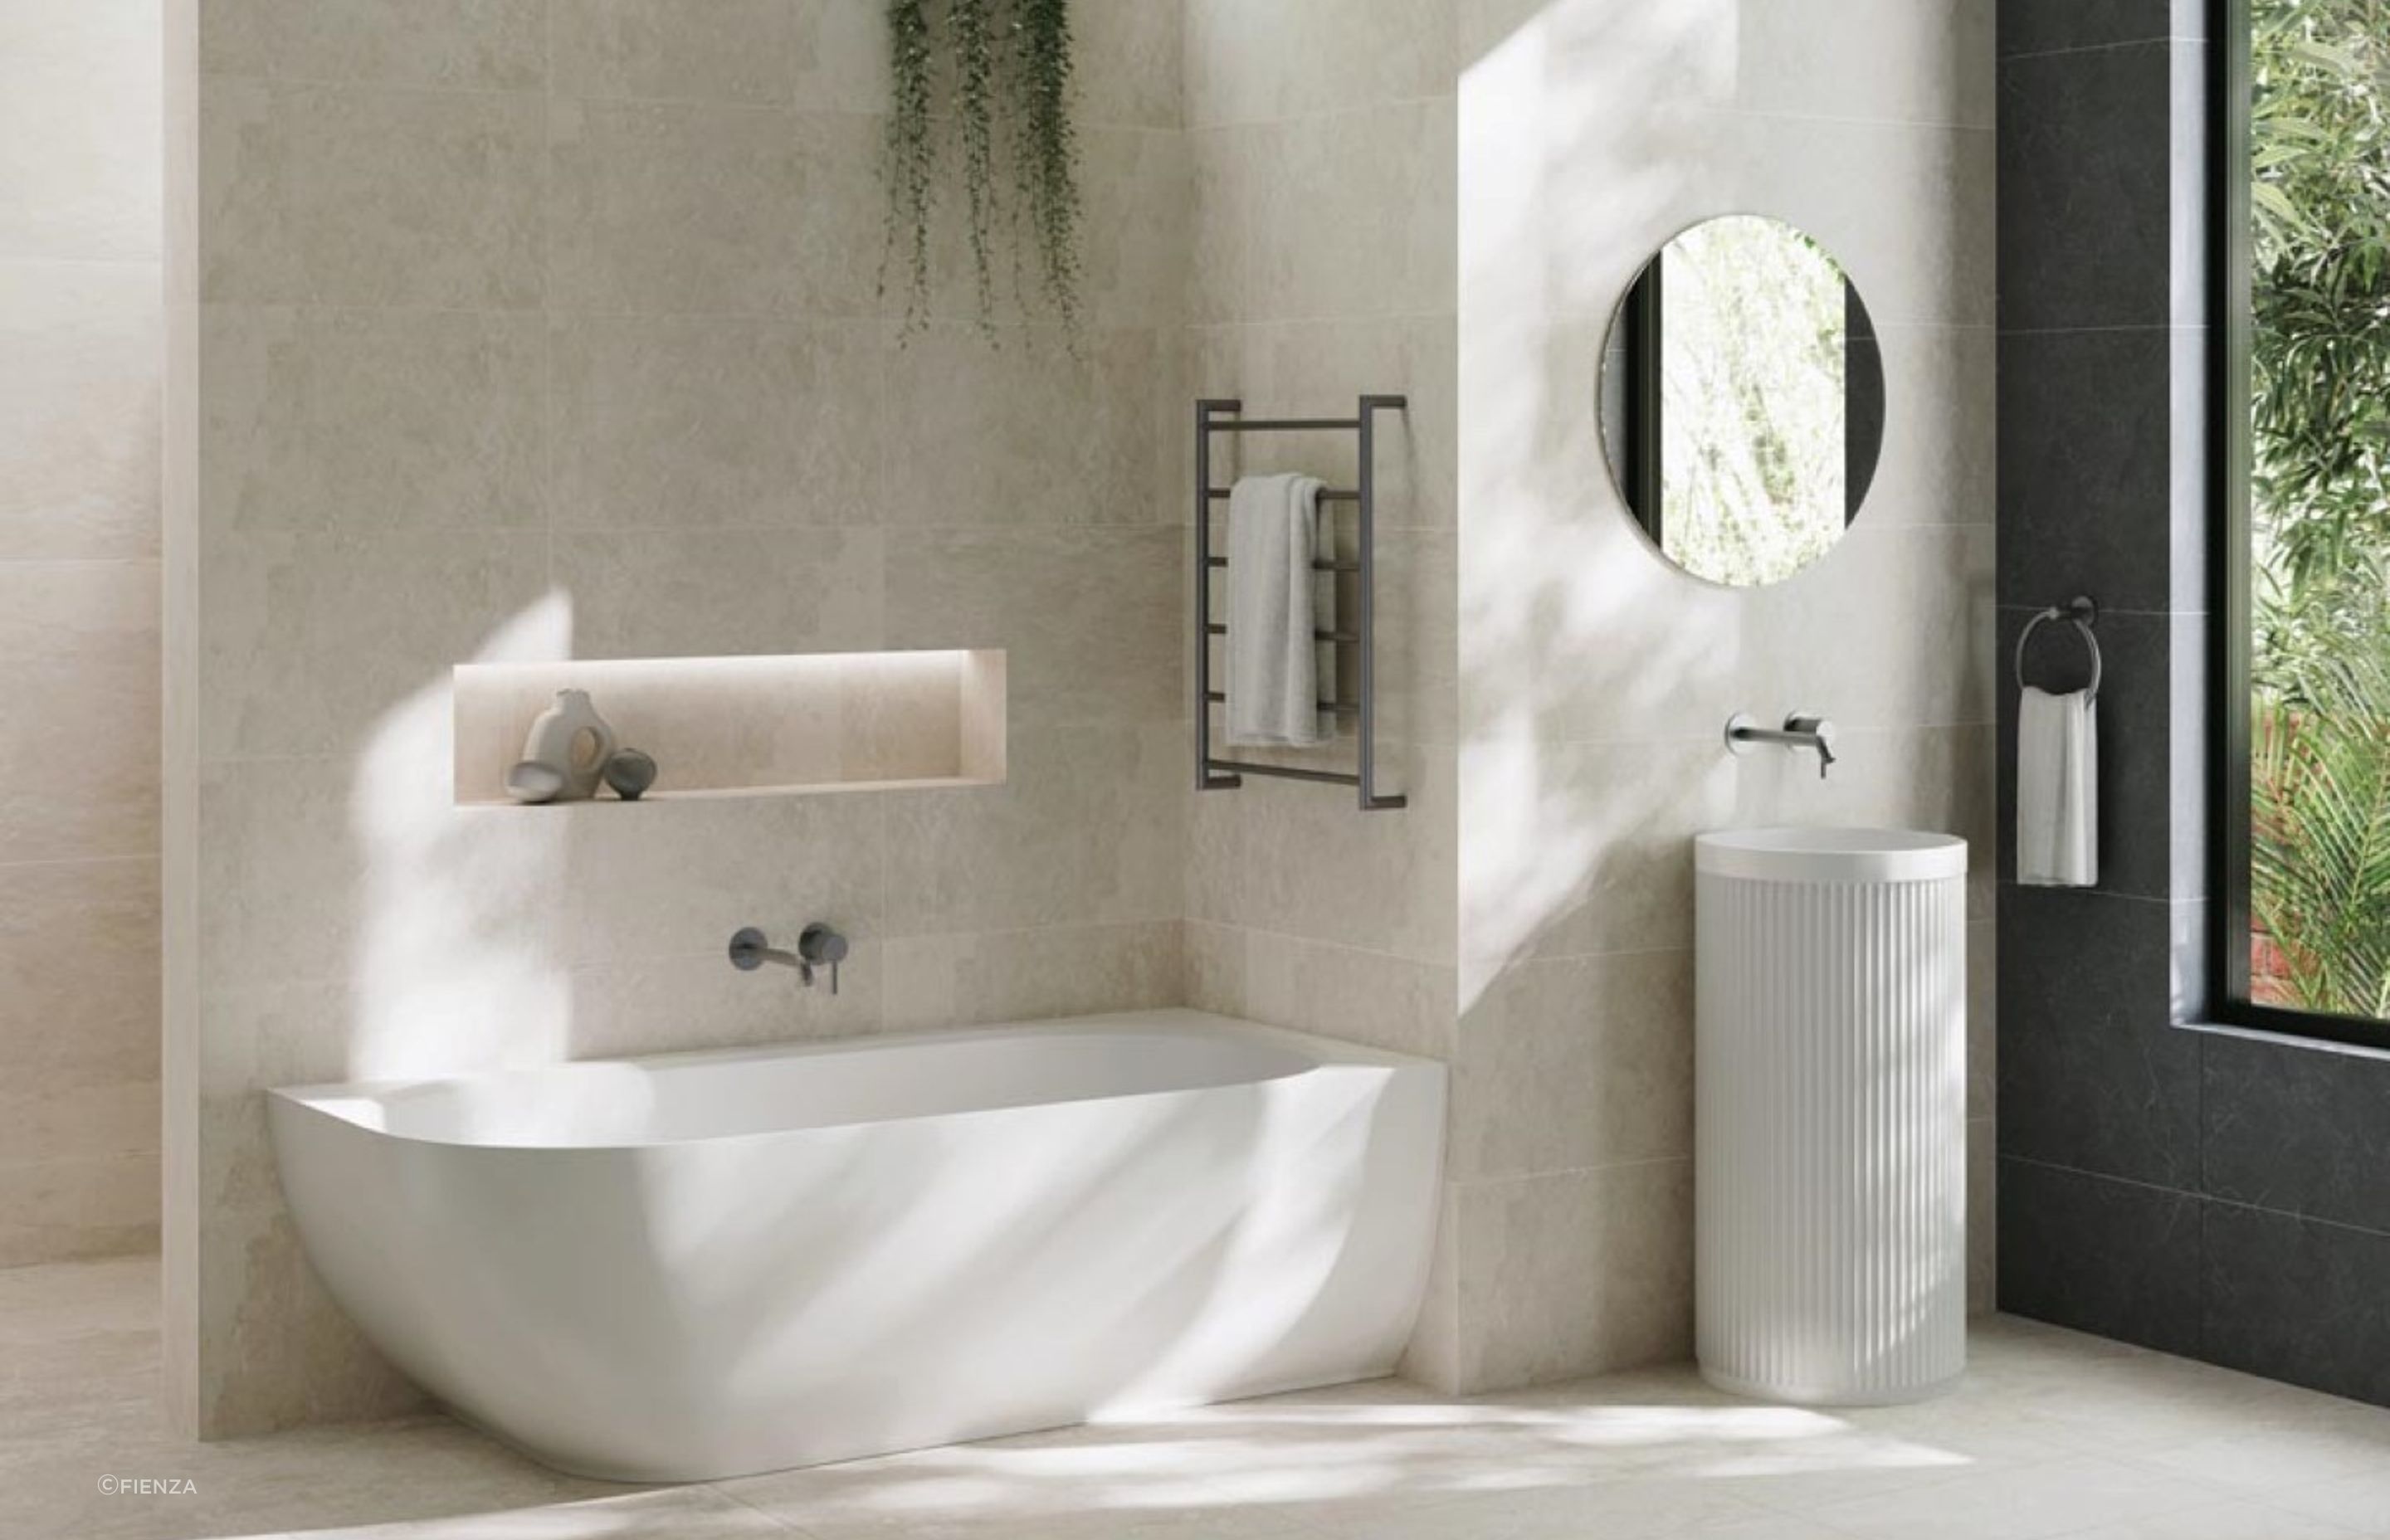 The Matta Solid Surface Corner Bath is a lavish choice that can fit stylishly into a corner to maximise floor space.